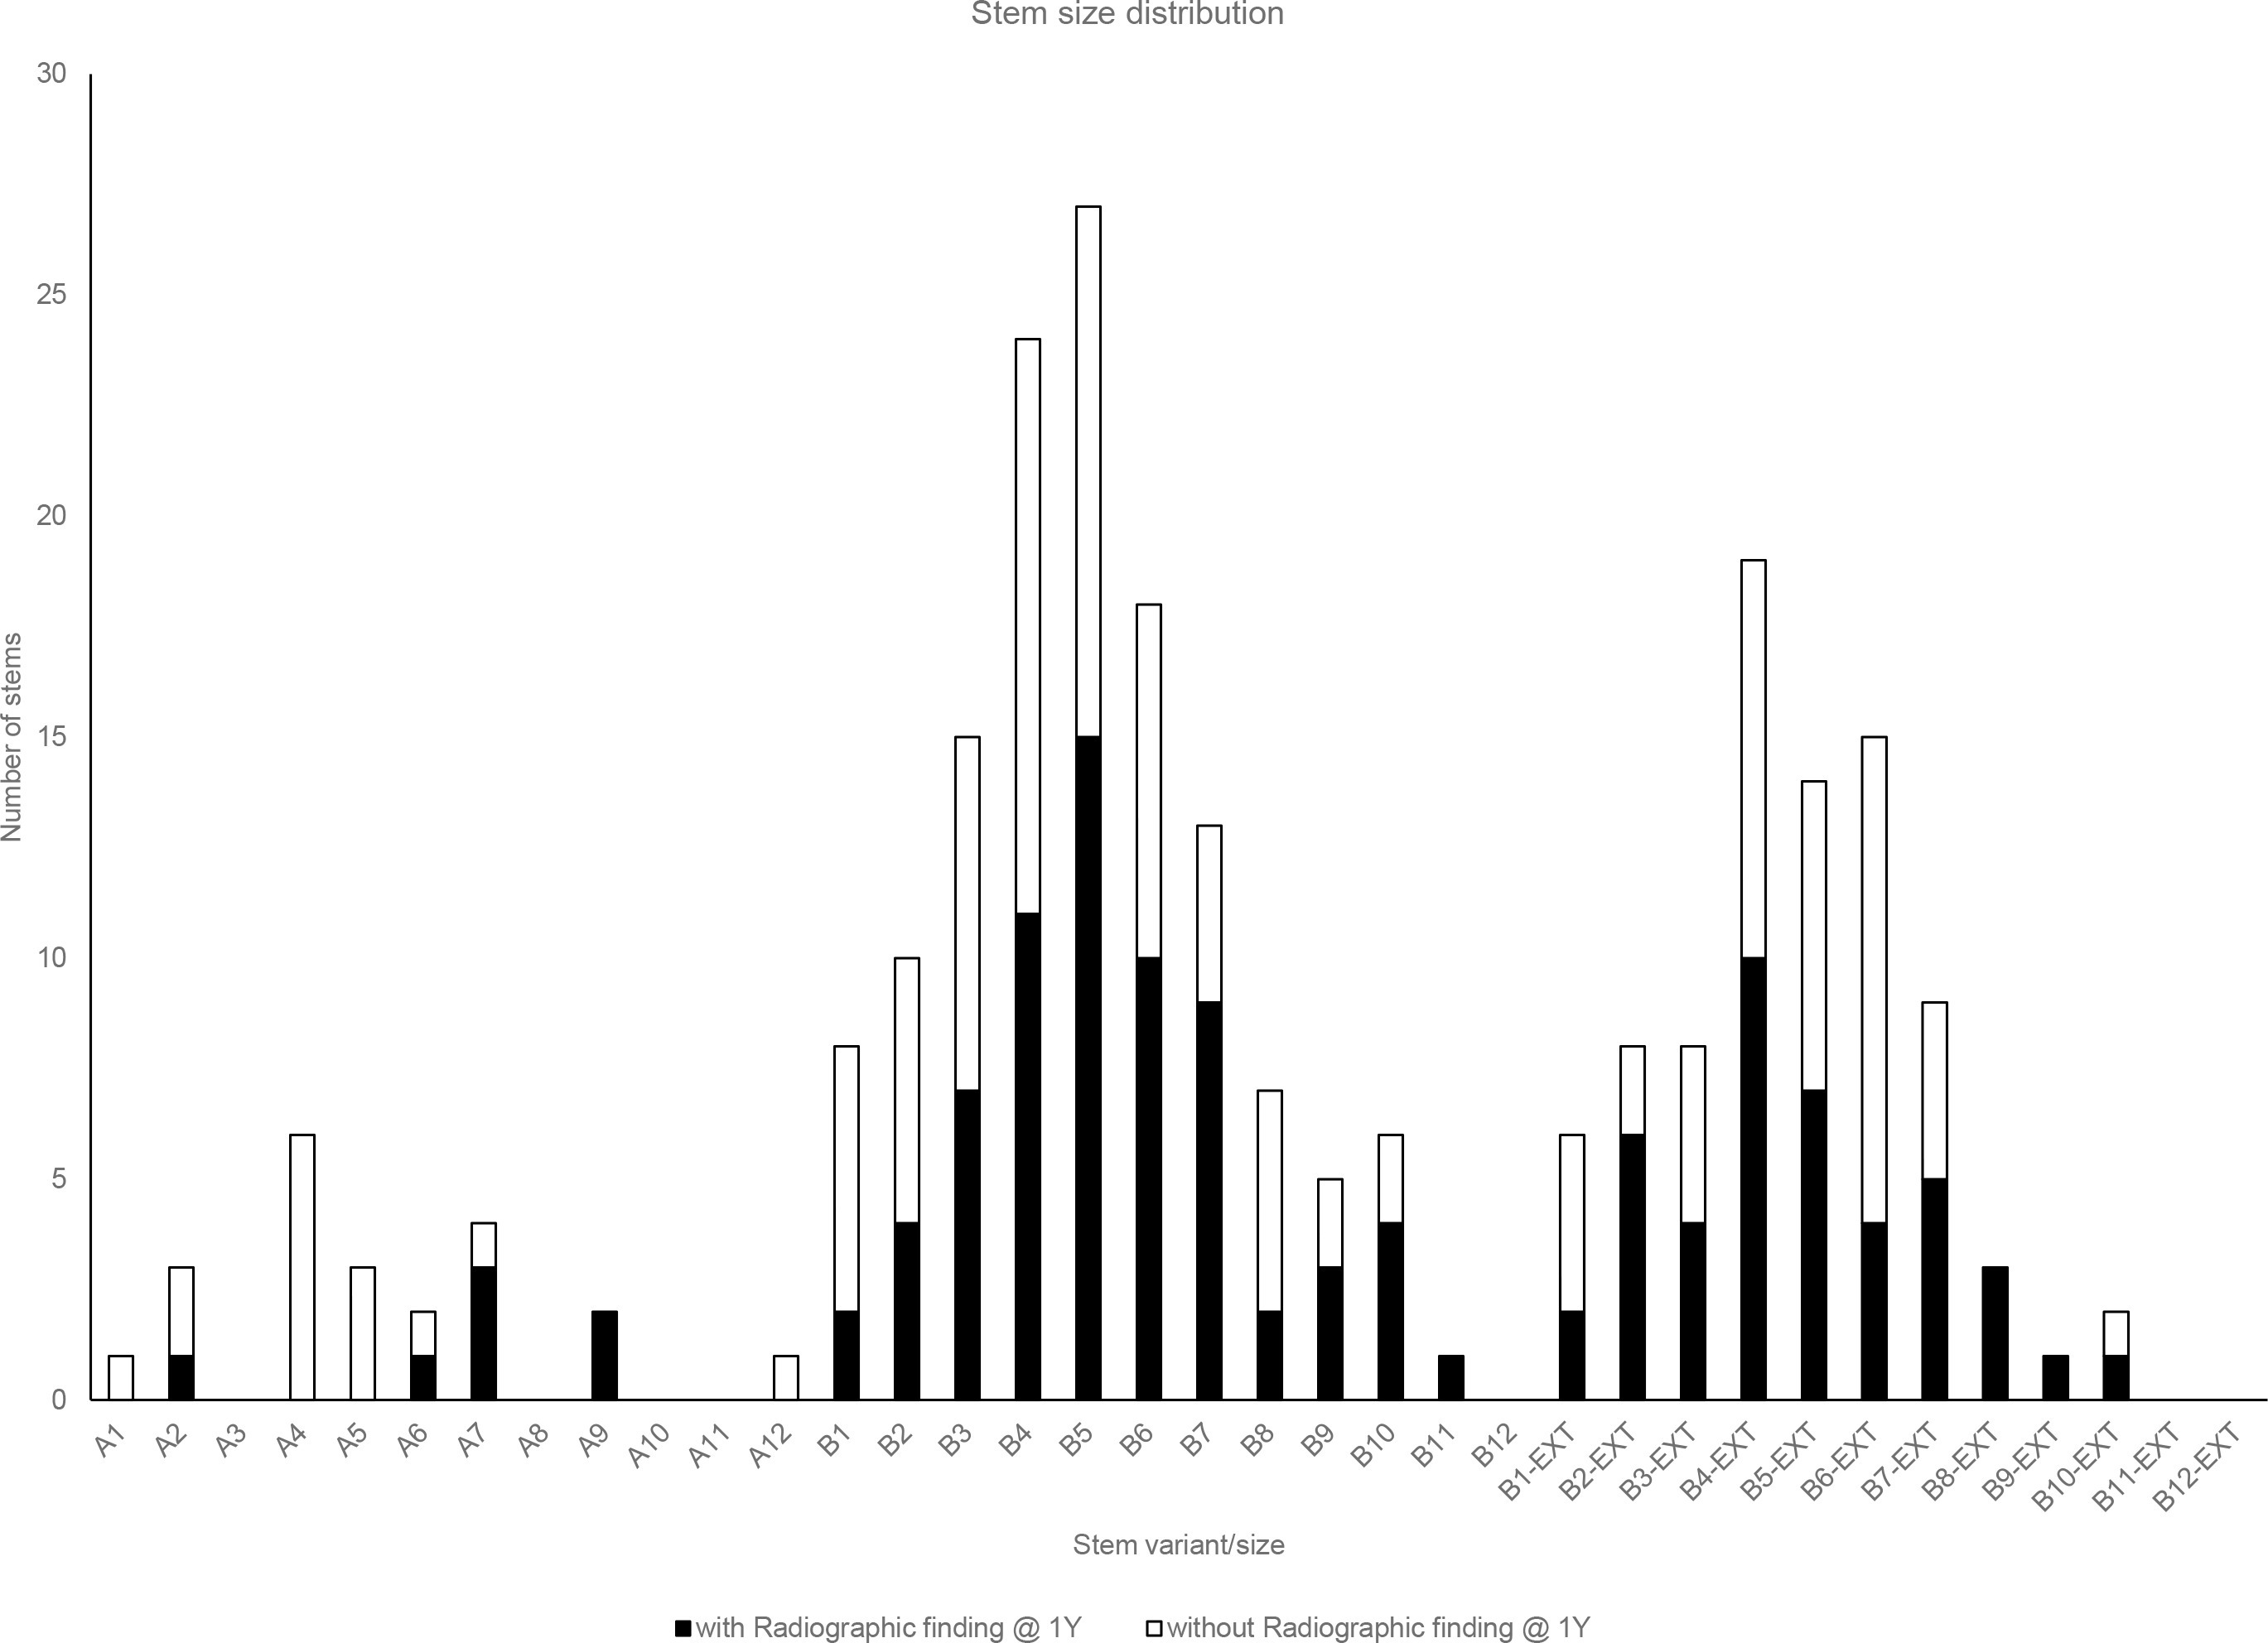 Fig. 1 
            Stem size distribution for entire cohort (n = 232). Black bar represents number of patients with radiological findings at one year postoperatively, and white bar represents number of patients without radiological finding at one year postoperatively.
          